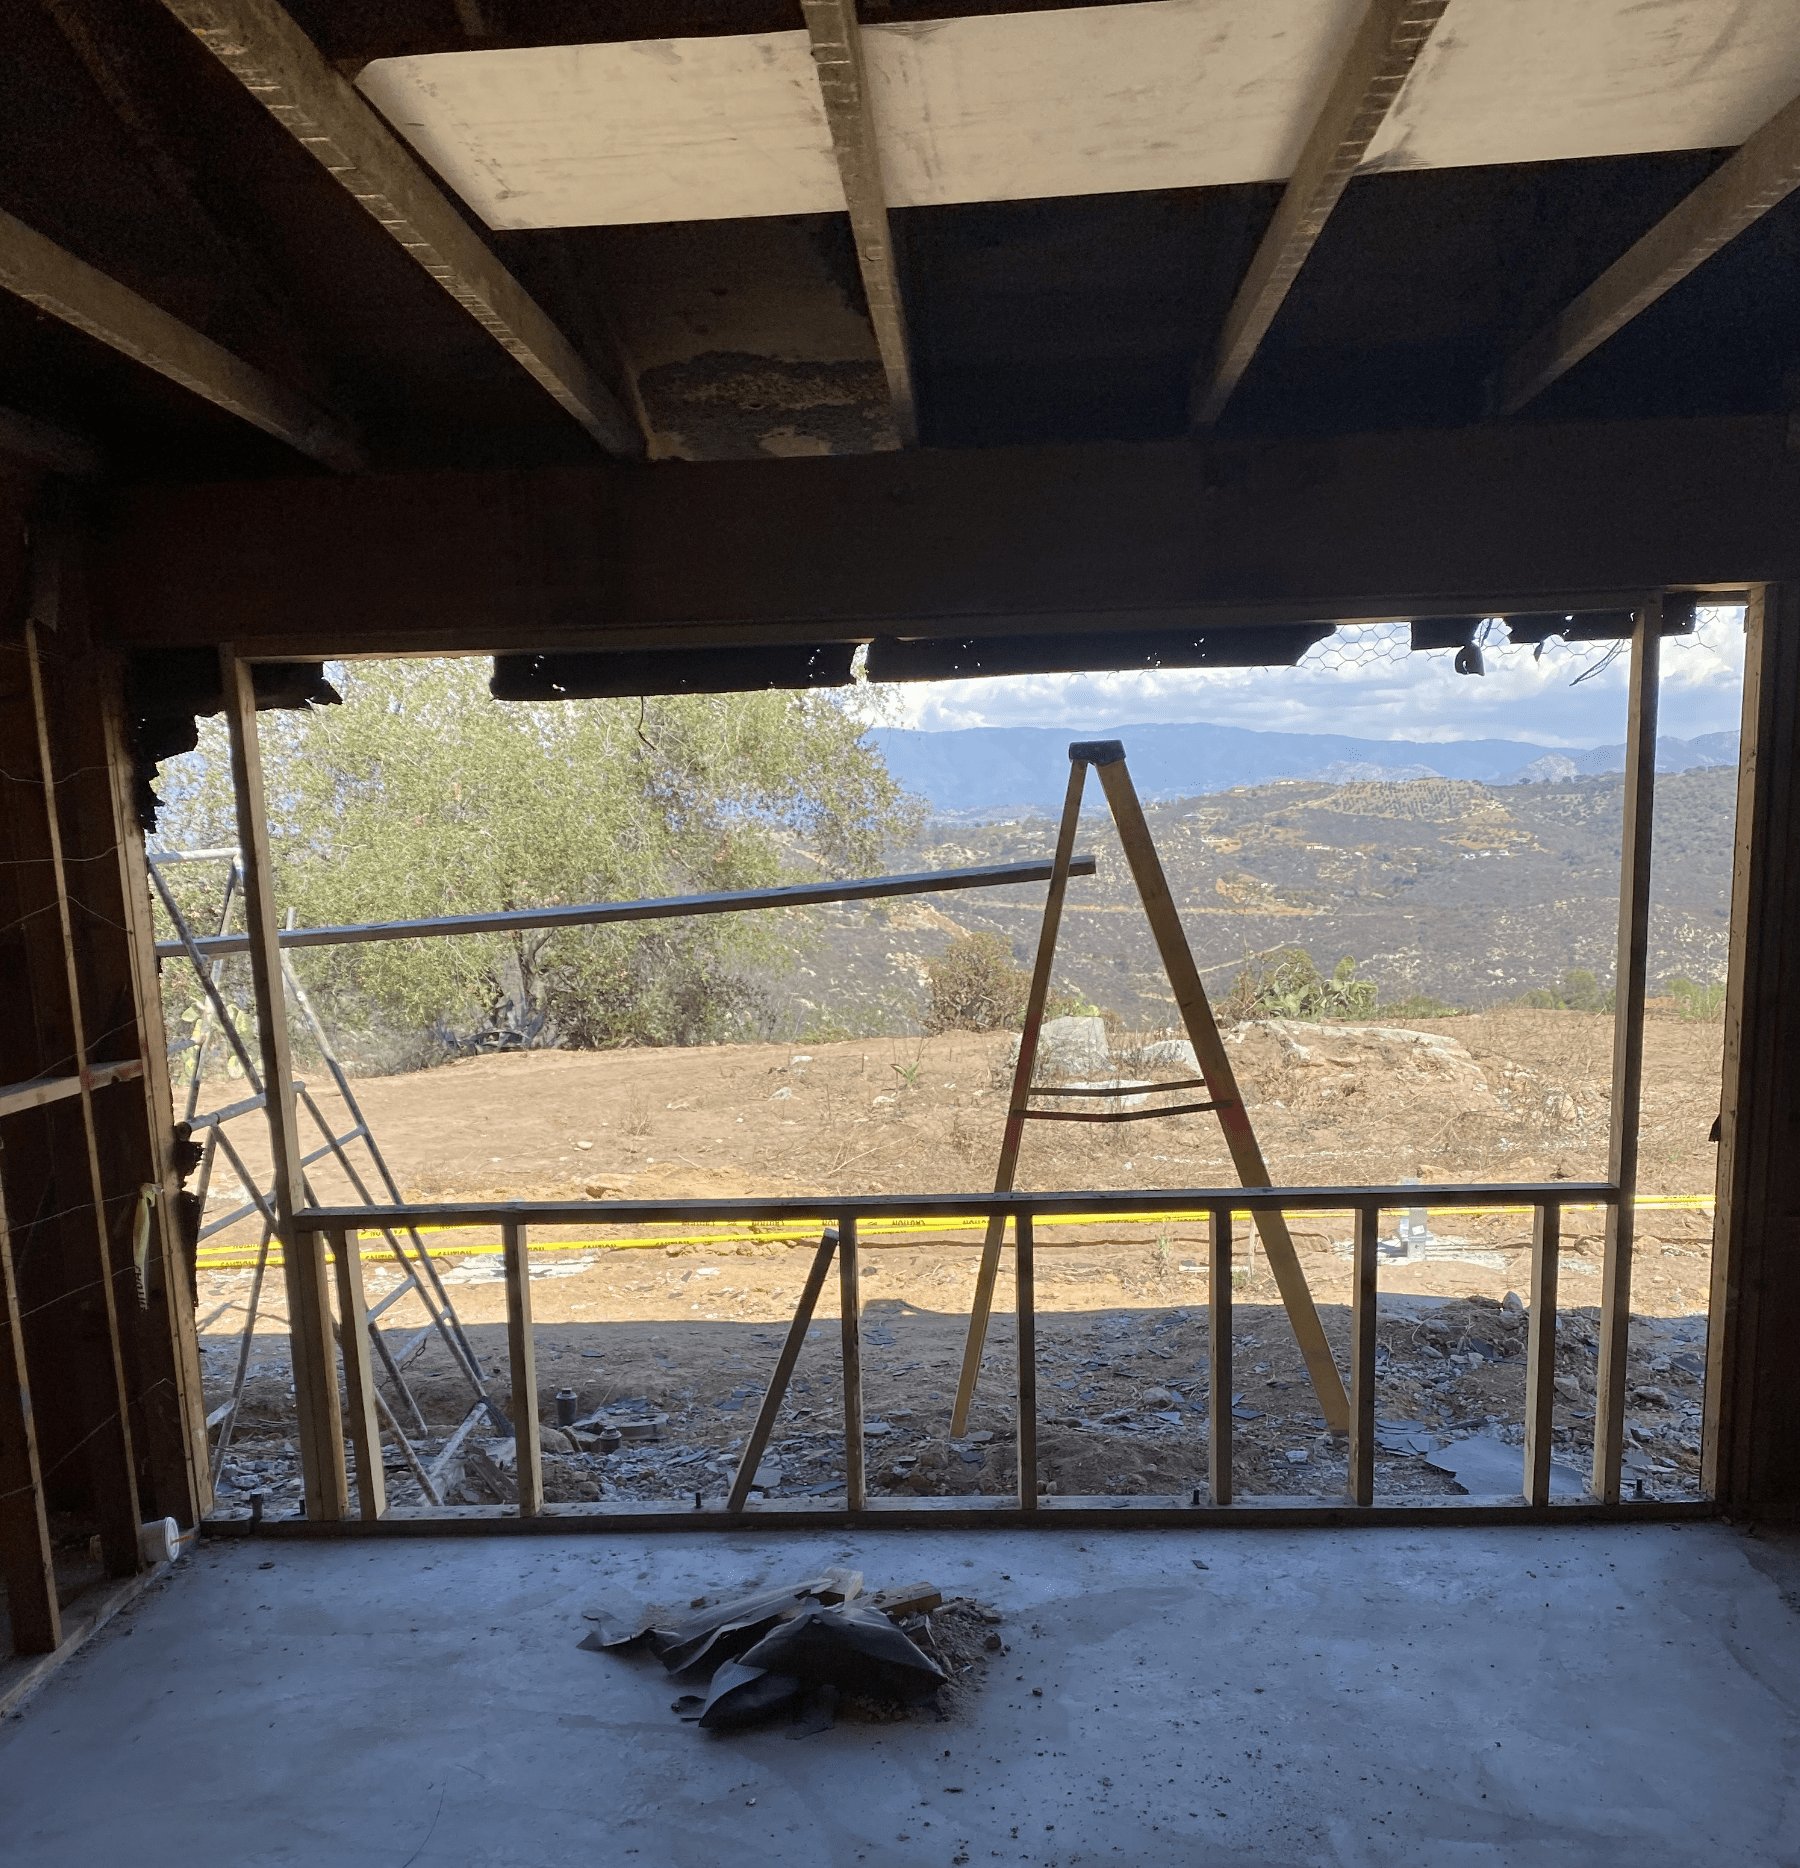 A photo from inside a construction site looking through a studded window frame at a mountainous view. An orange ladder and construction tools obscure the view slightly.